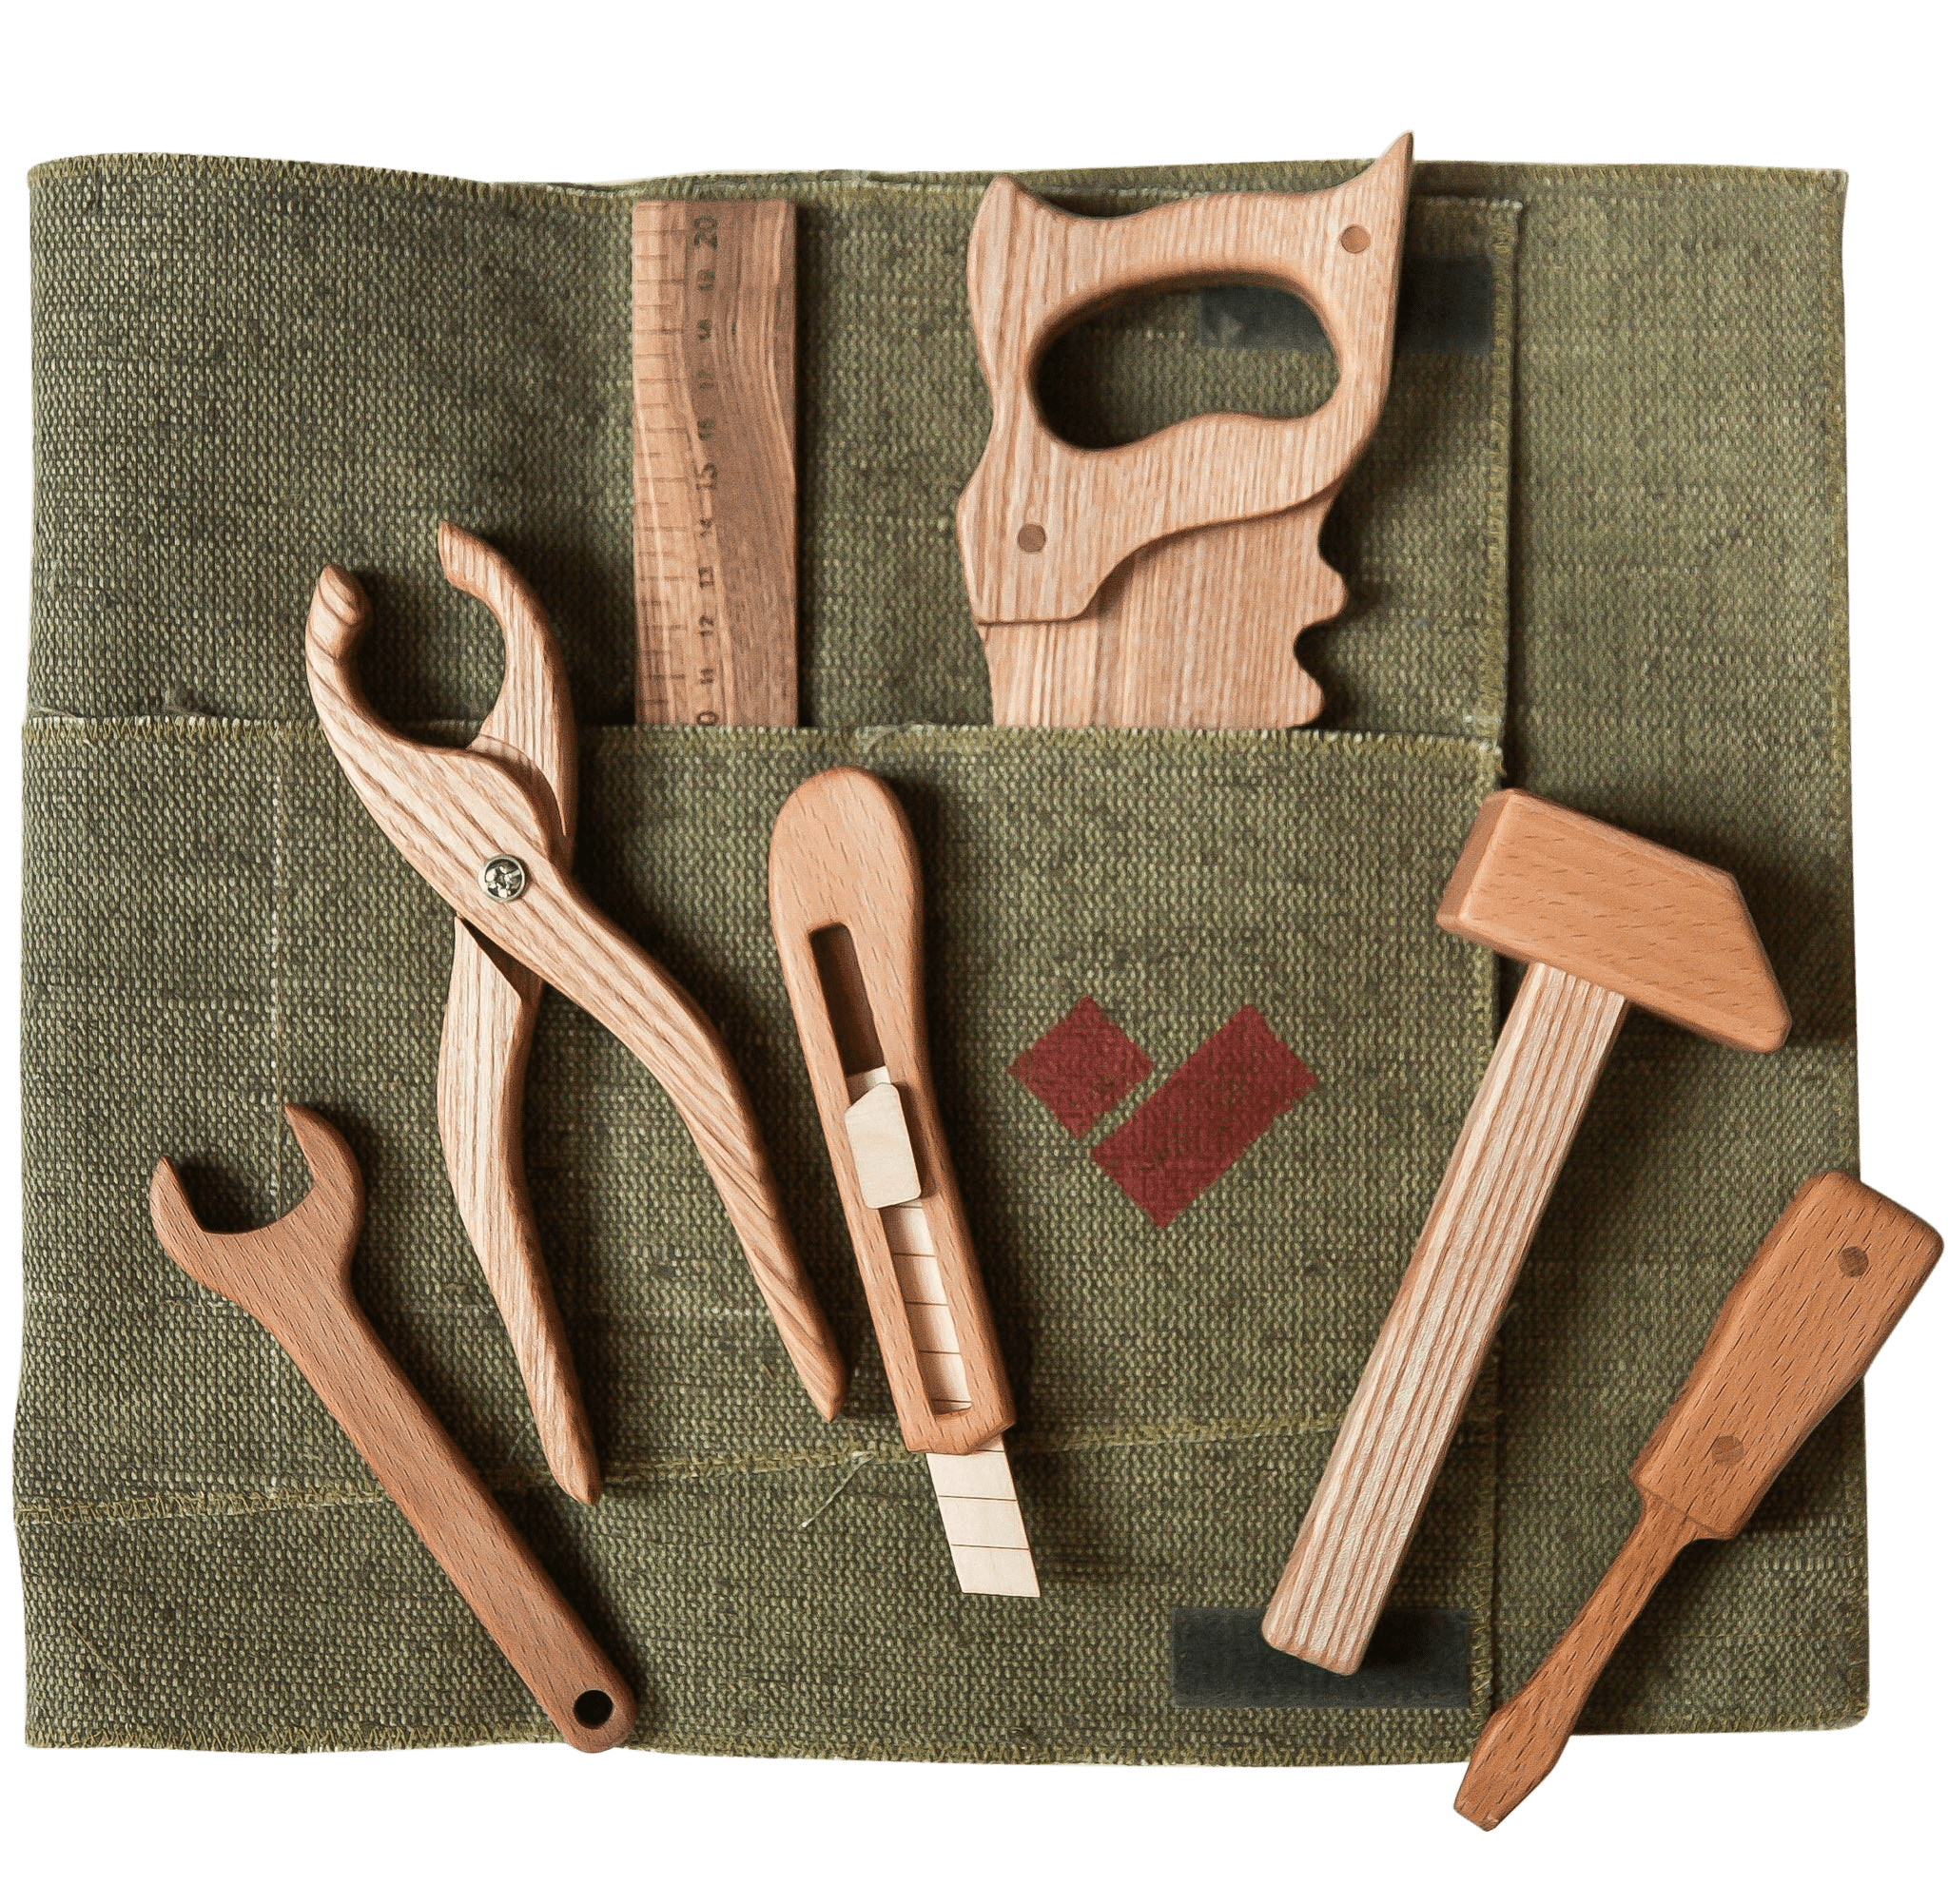 Architect Tool Set - Wooden Toy 1 Year